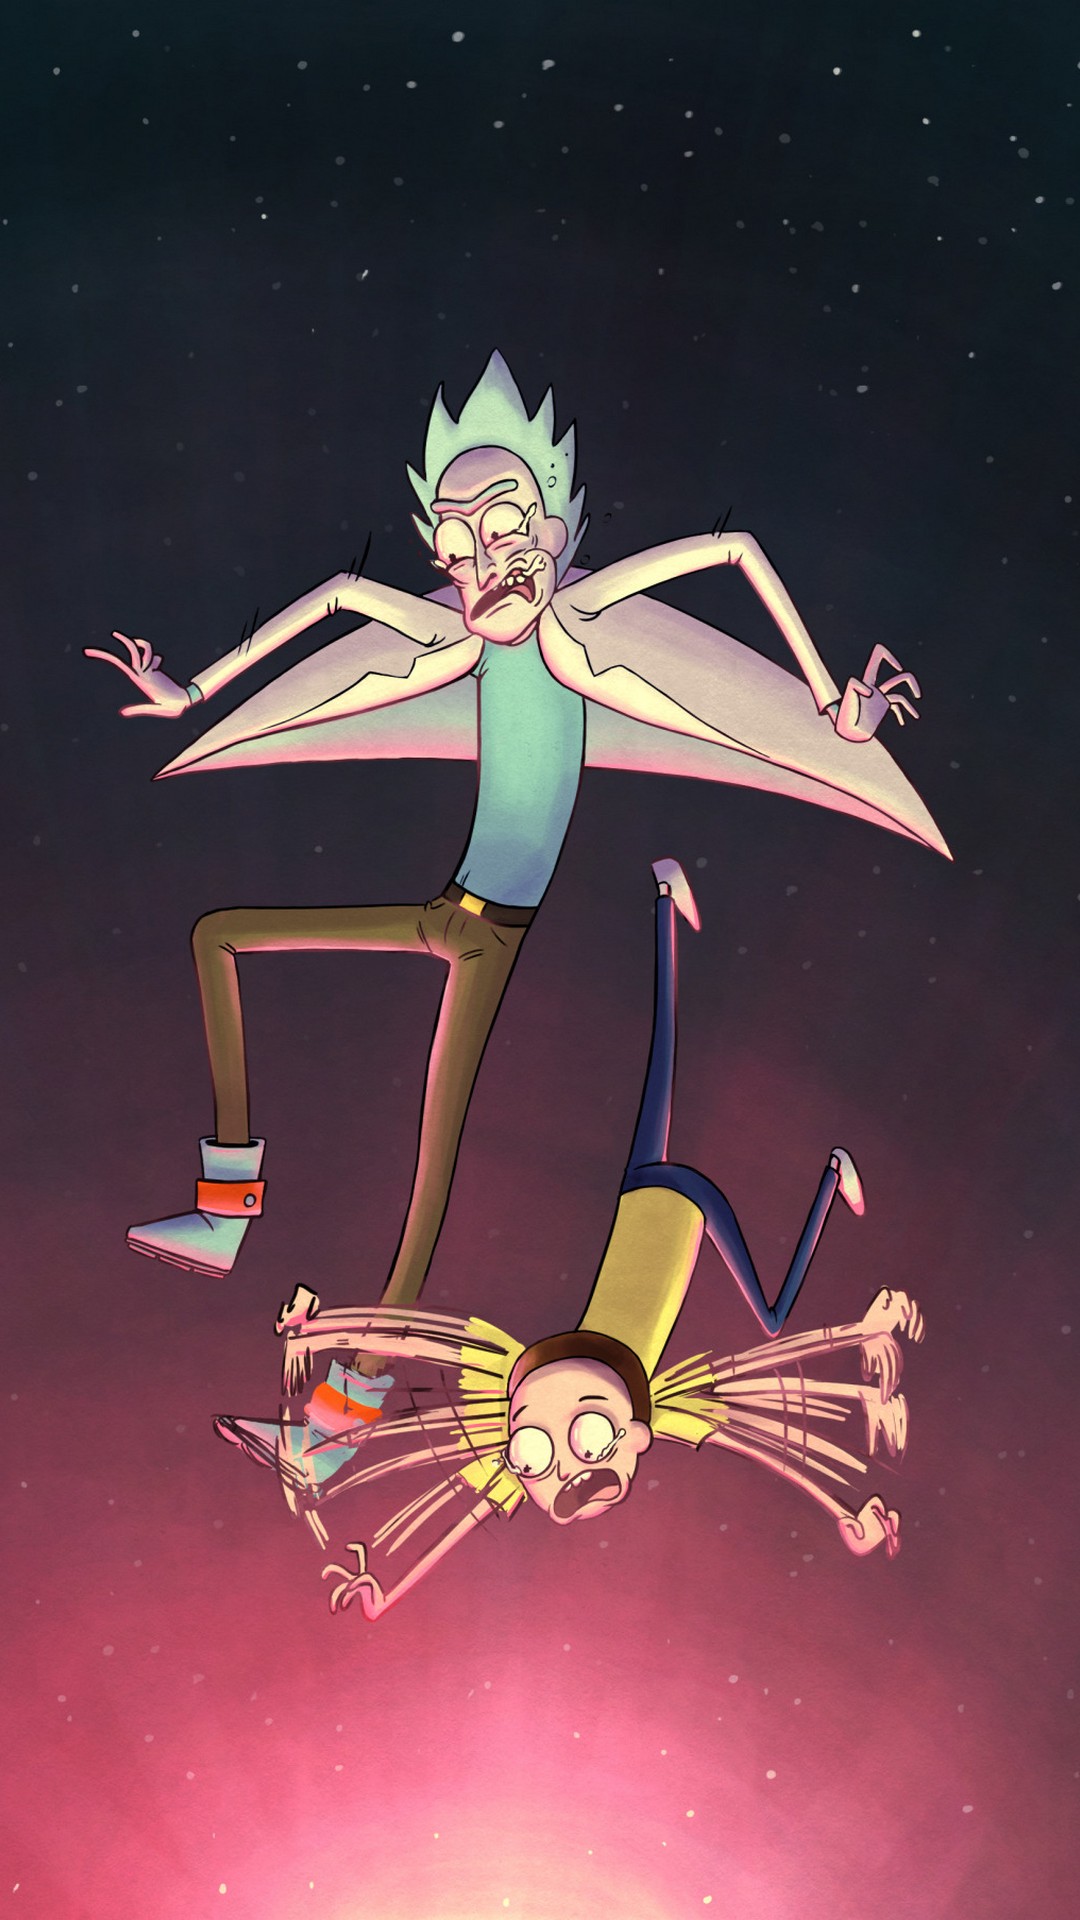 Best Rick And Morty Cartoon Network iPhone Wallpaper resolution 1080x1920